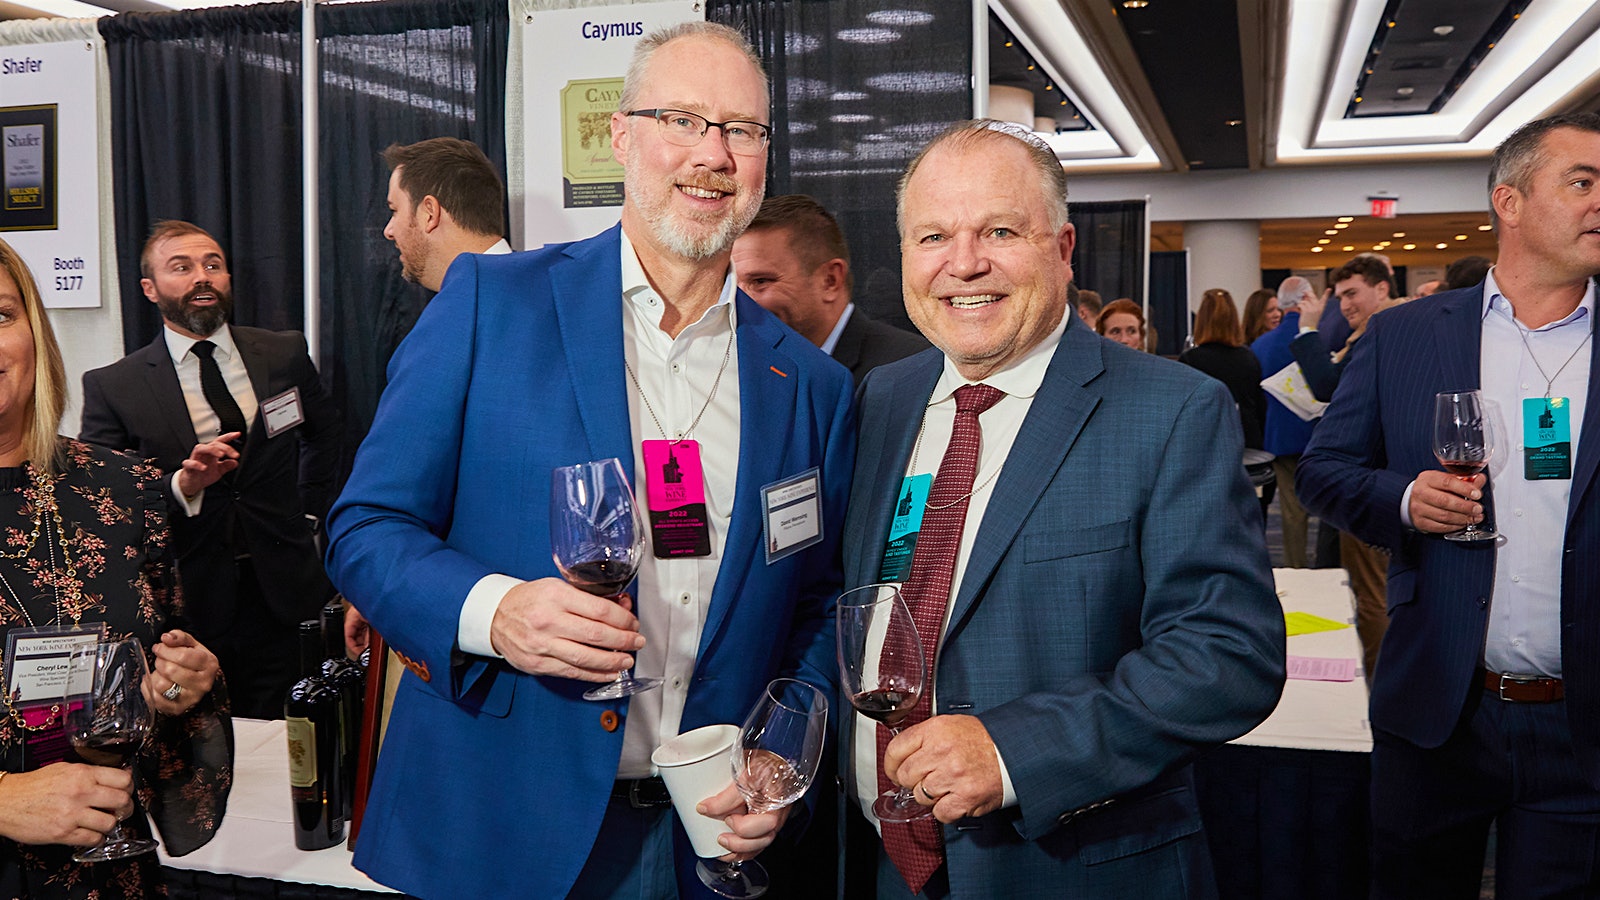  Caymus owner Chuck Wagner (right) with guest at the 2022 New York Wine Experience